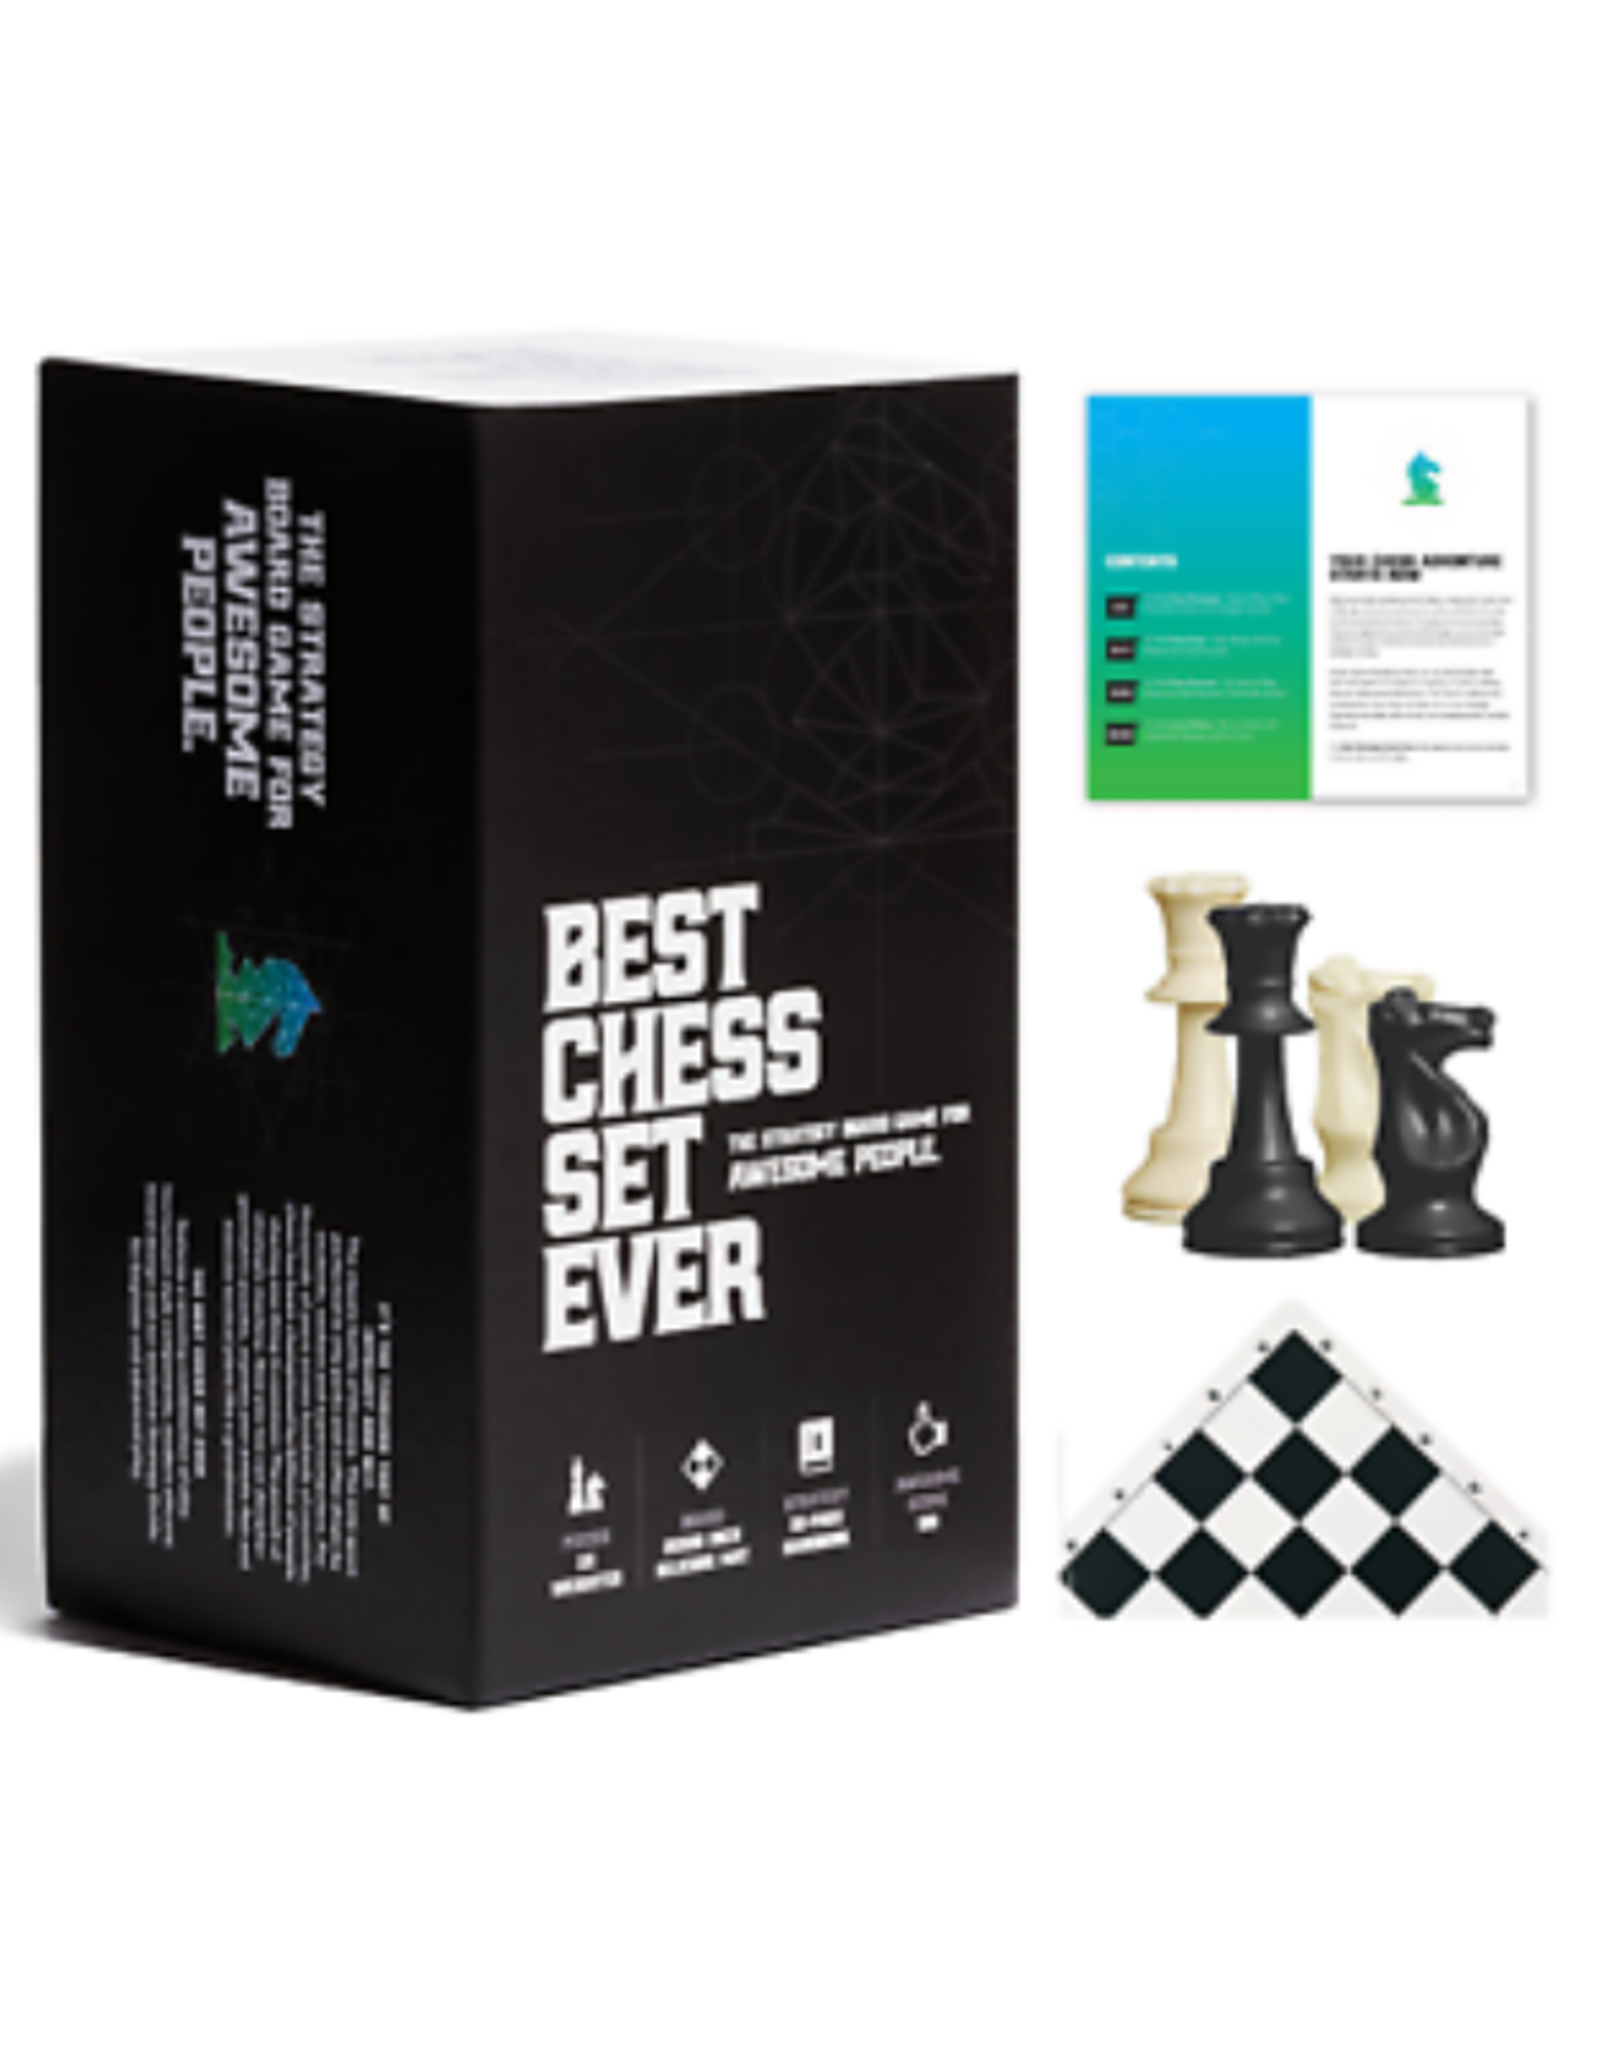 Best Chess Set Ever - 3X Weight by Best Knight Games